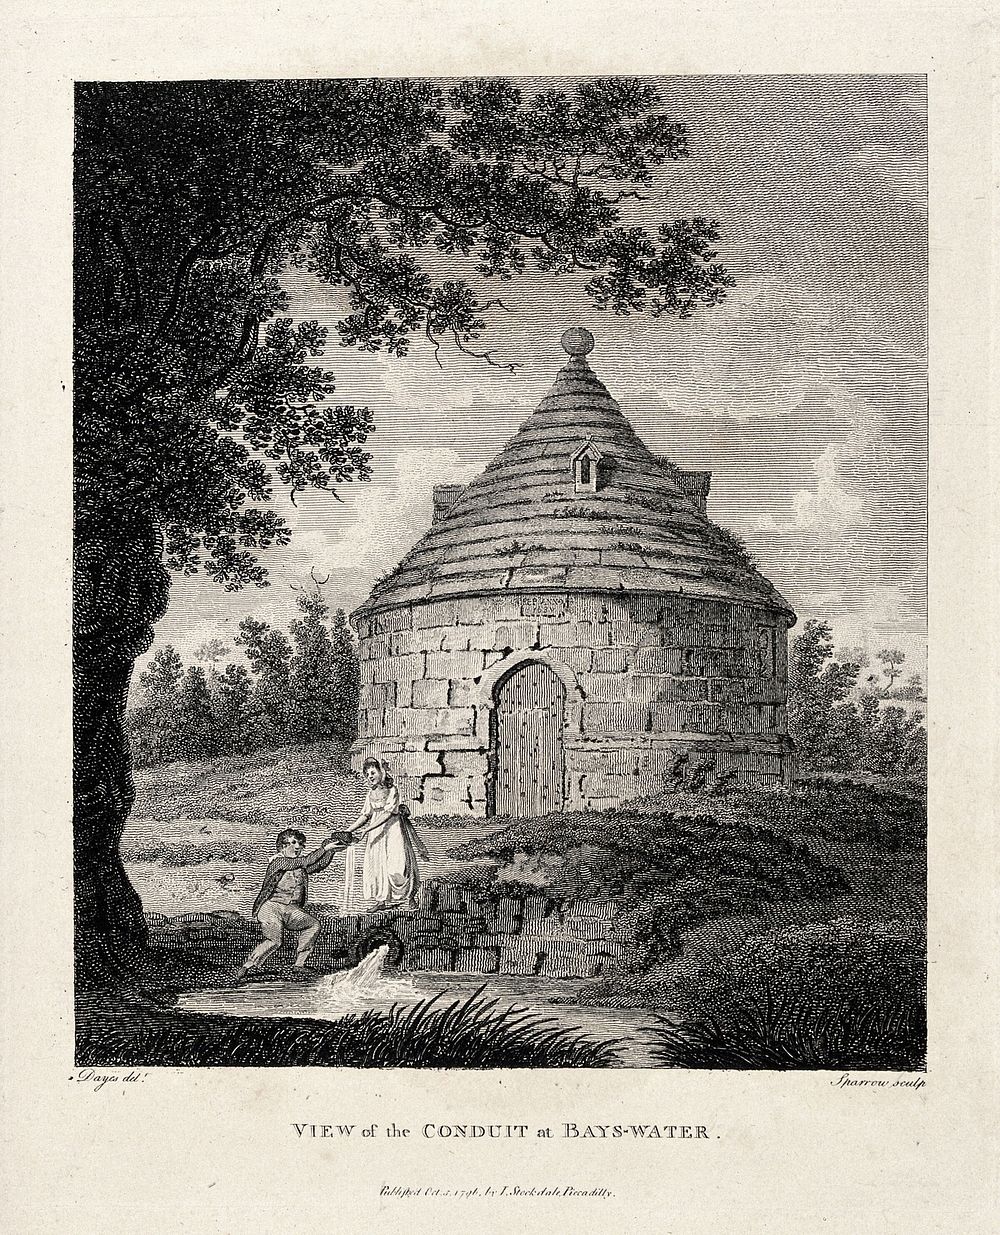 The conduit at Bayswater. Engraving by S. Sparrow, 1796, after E. Dayes.